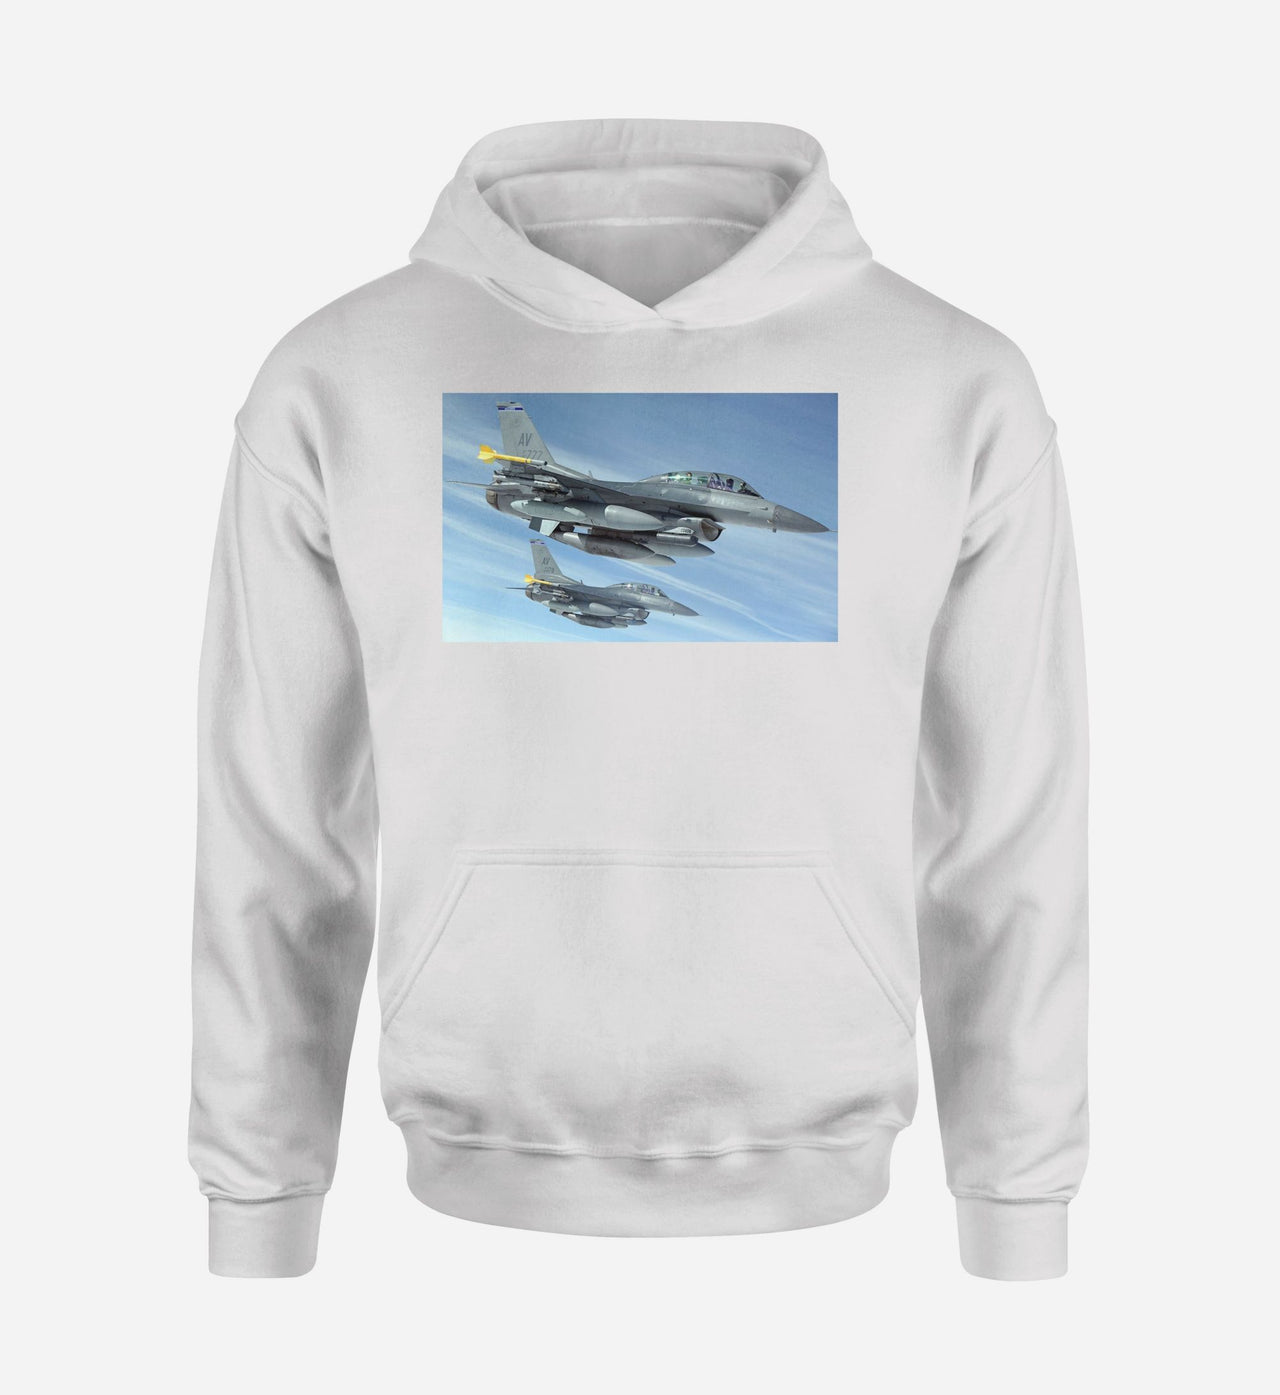 Two Fighting Falcon Designed Hoodies